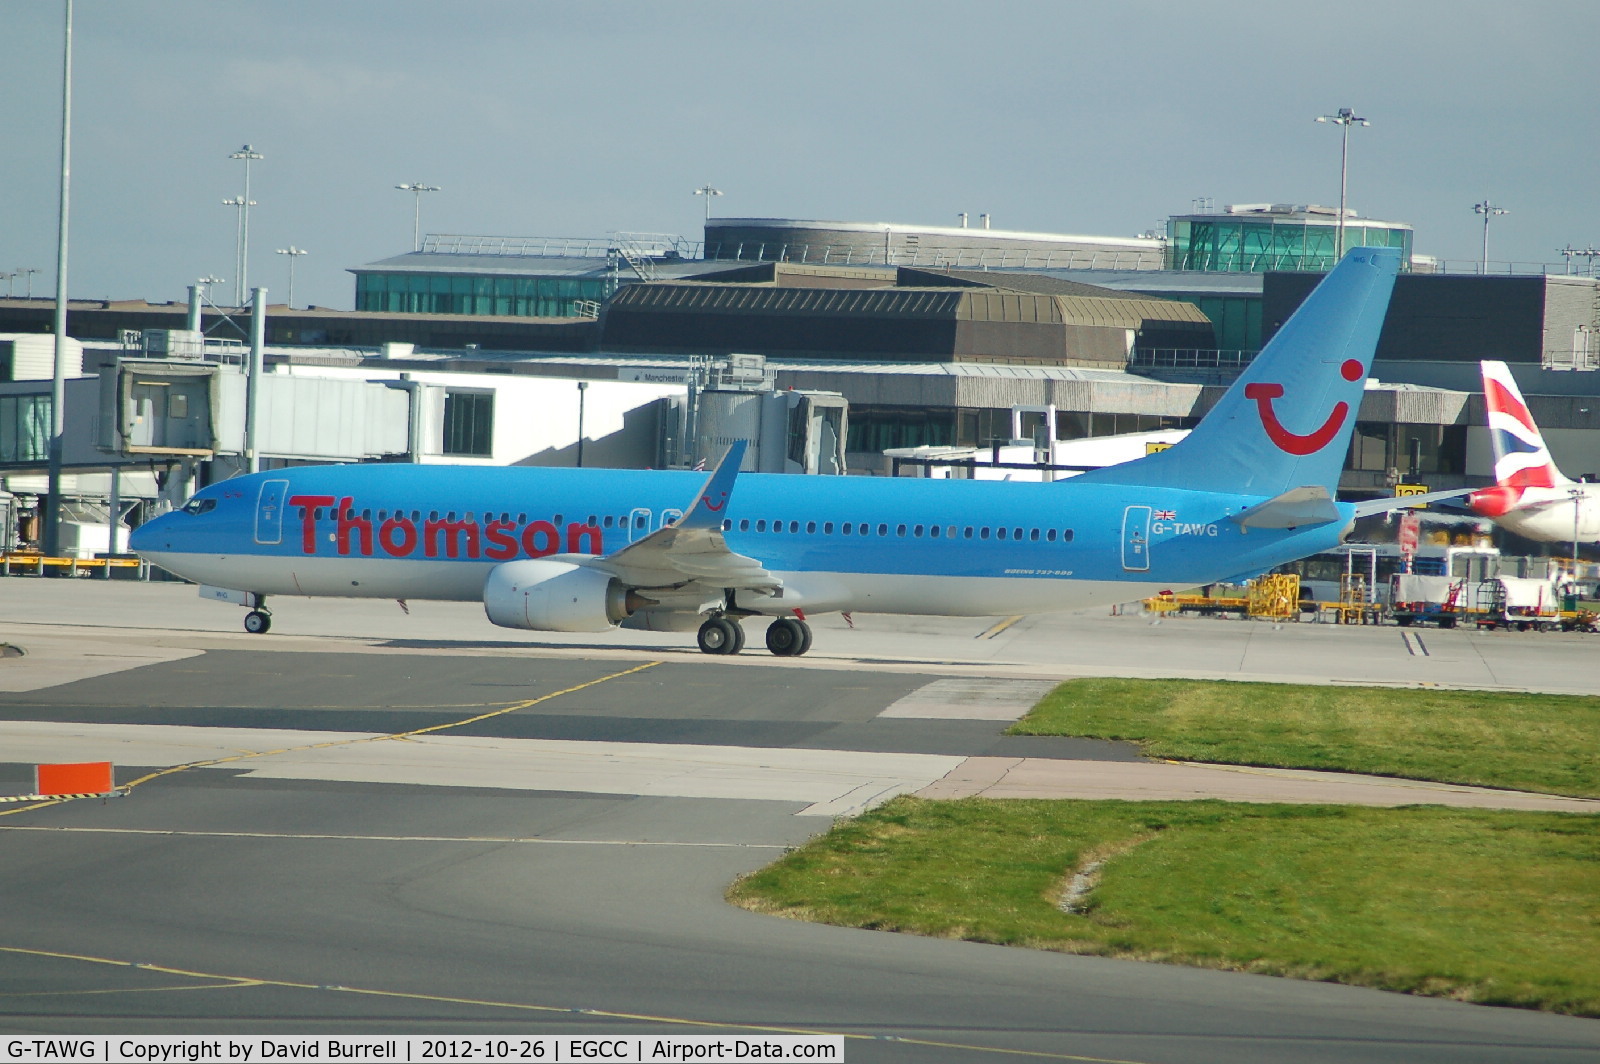 G-TAWG, 2012 Boeing 737-8K5 C/N 37266, Thomson Boeing 737-8K5 Taxiing at Manchester Airport.